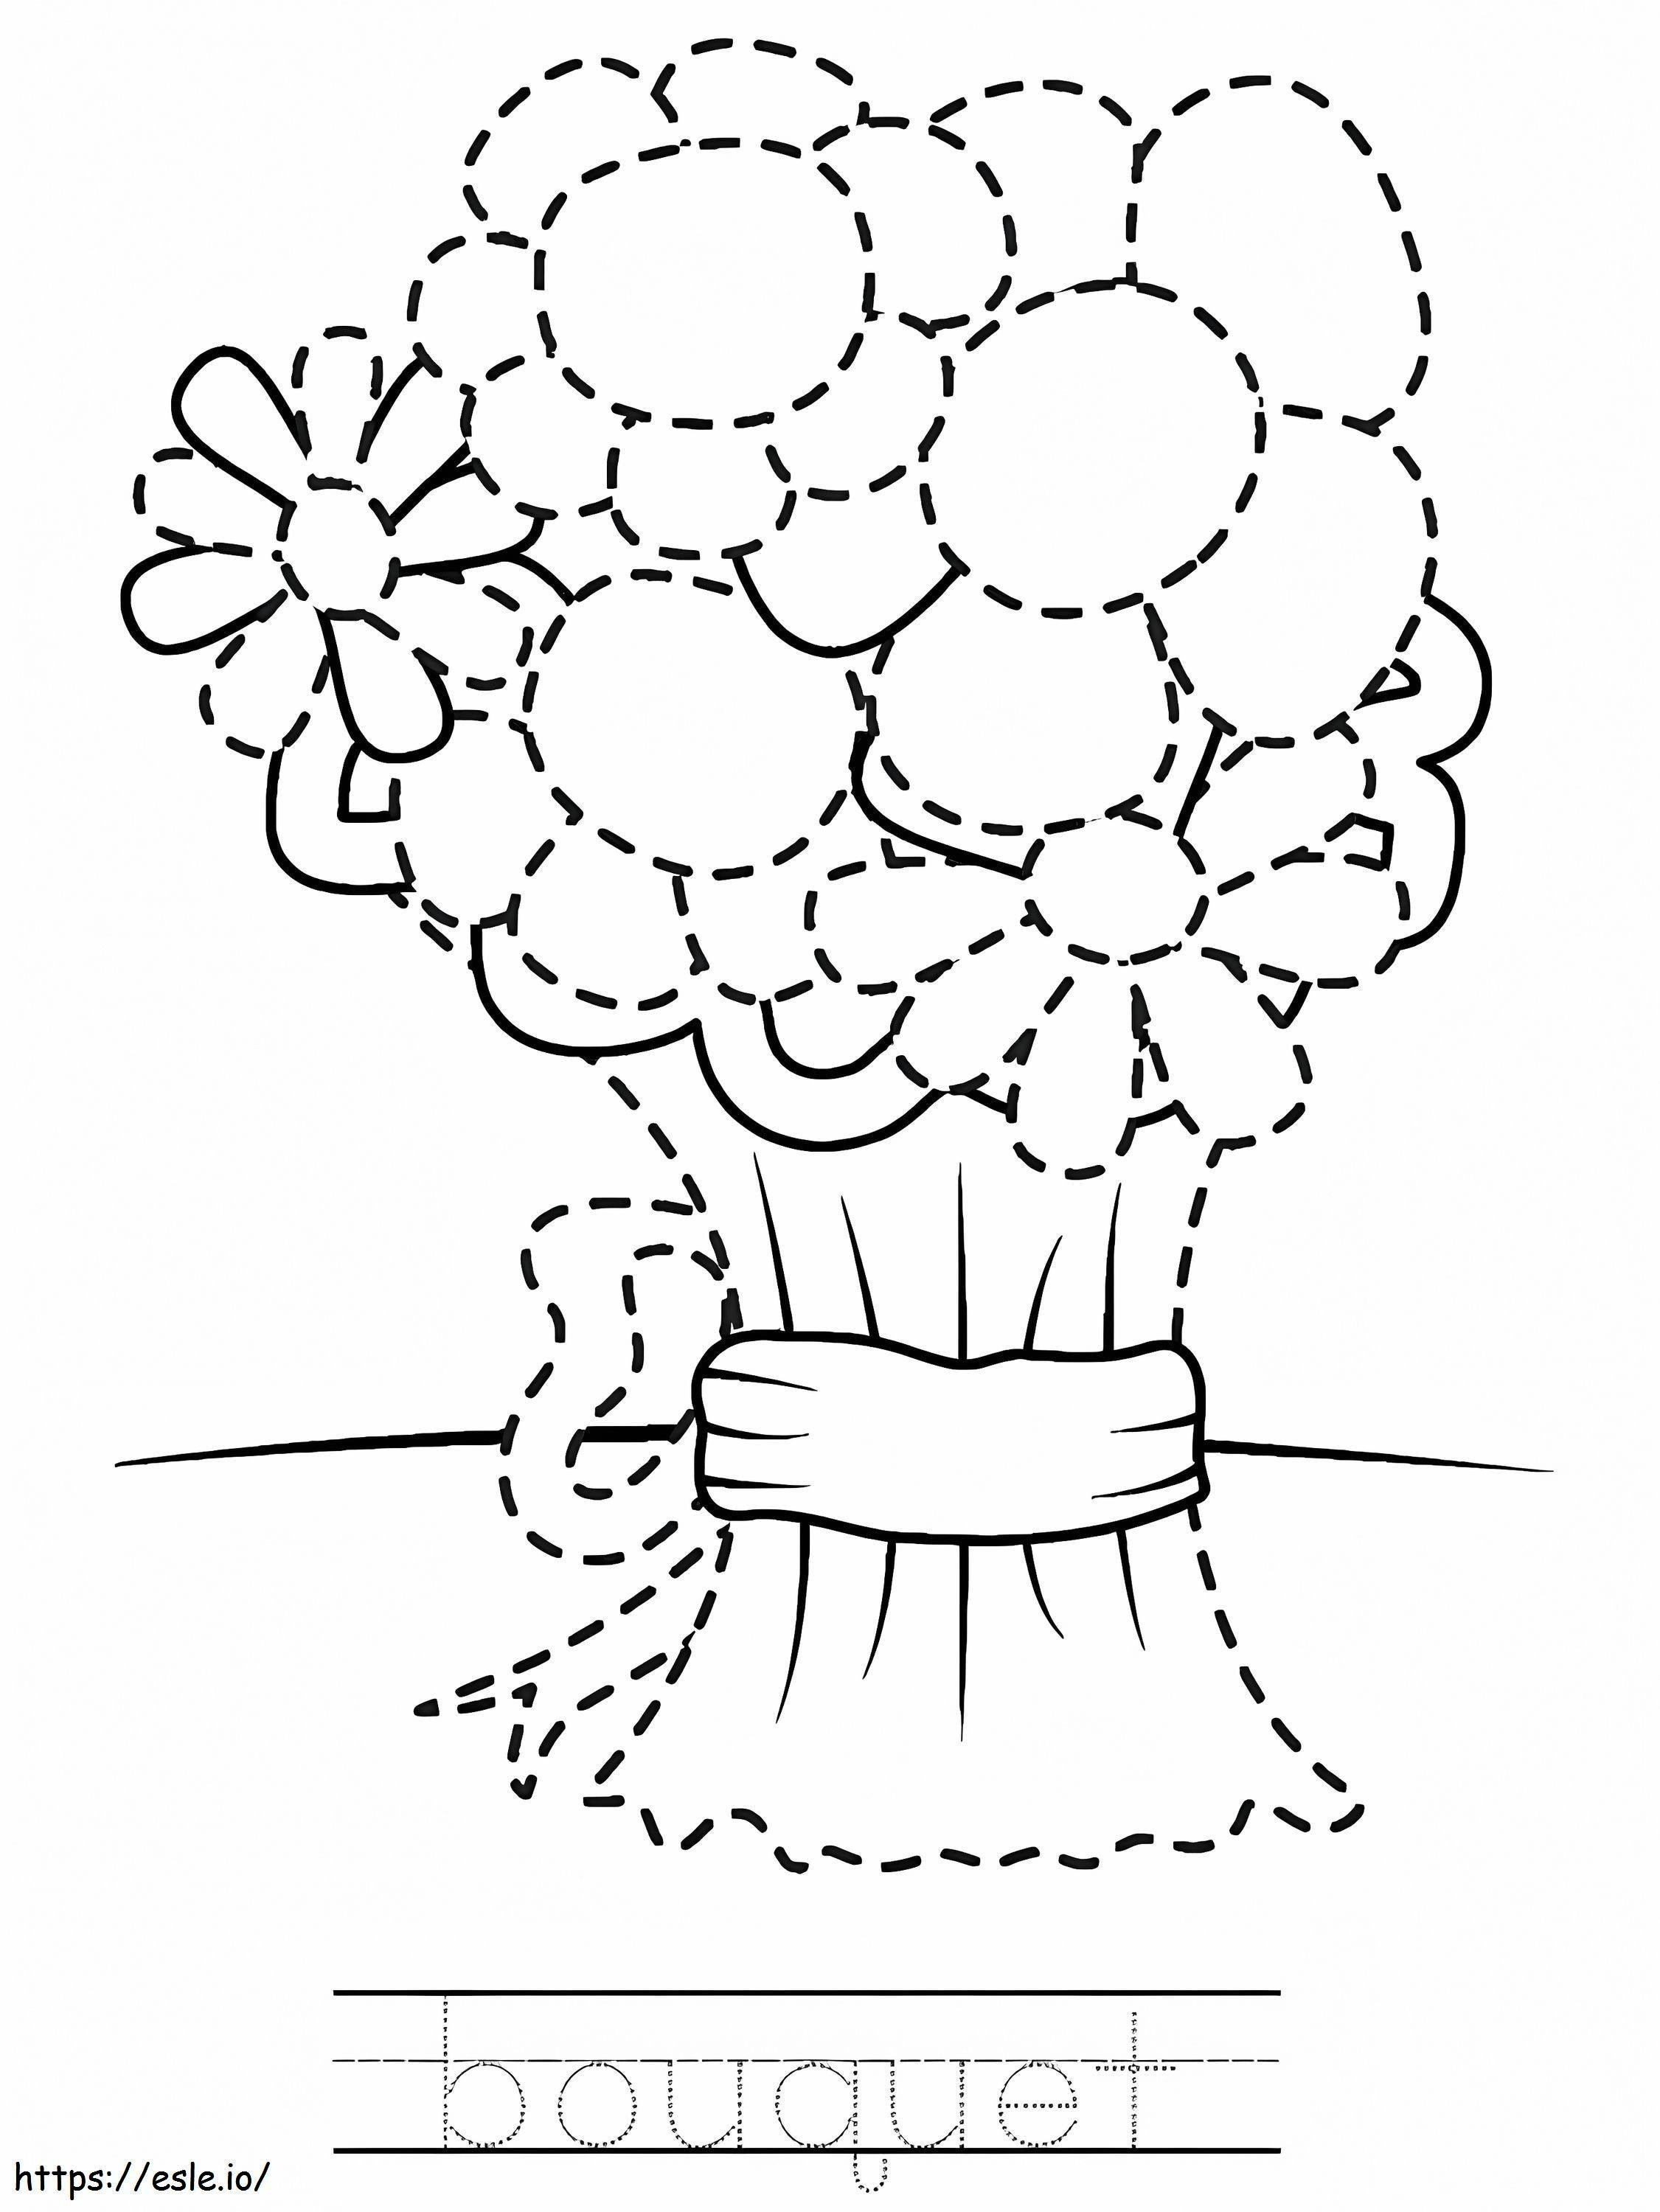 Bouquet Tracing coloring page